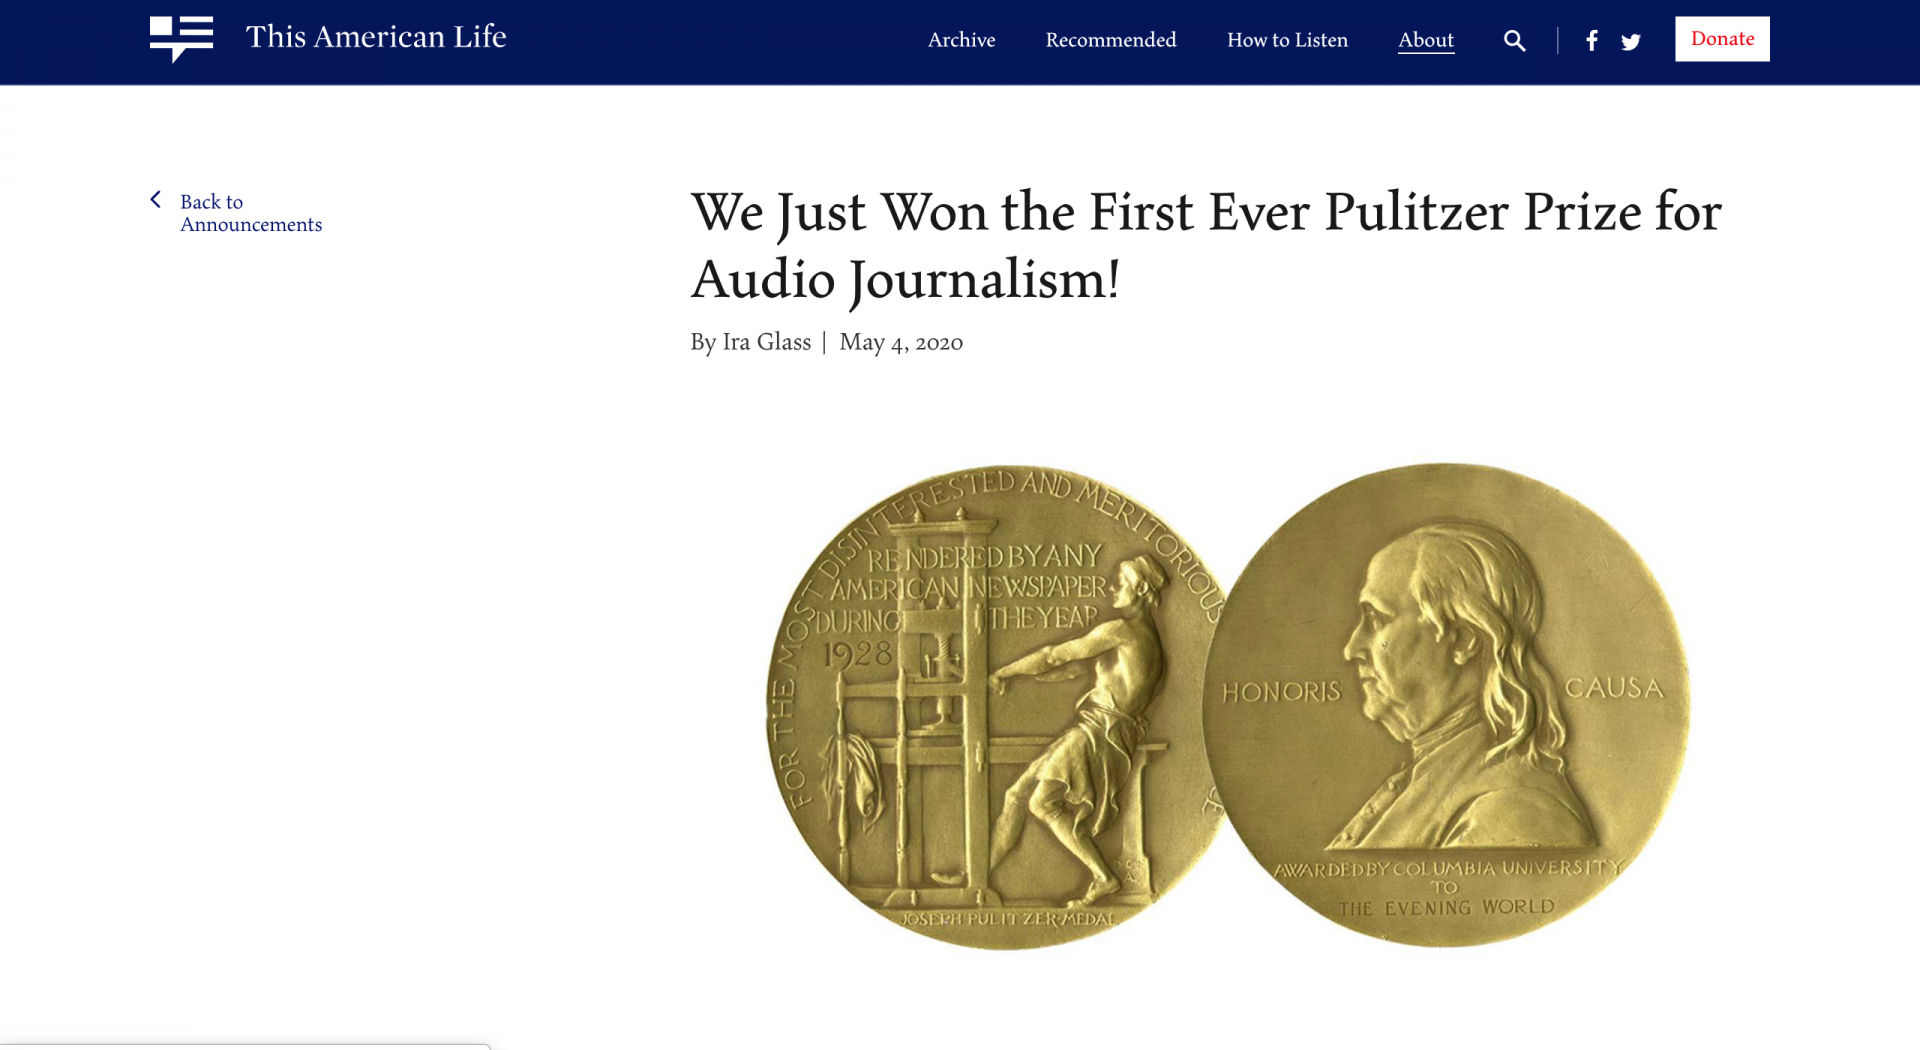 Winners React: The 104th Class of Pulitzer Winners - The Pulitzer Prizes